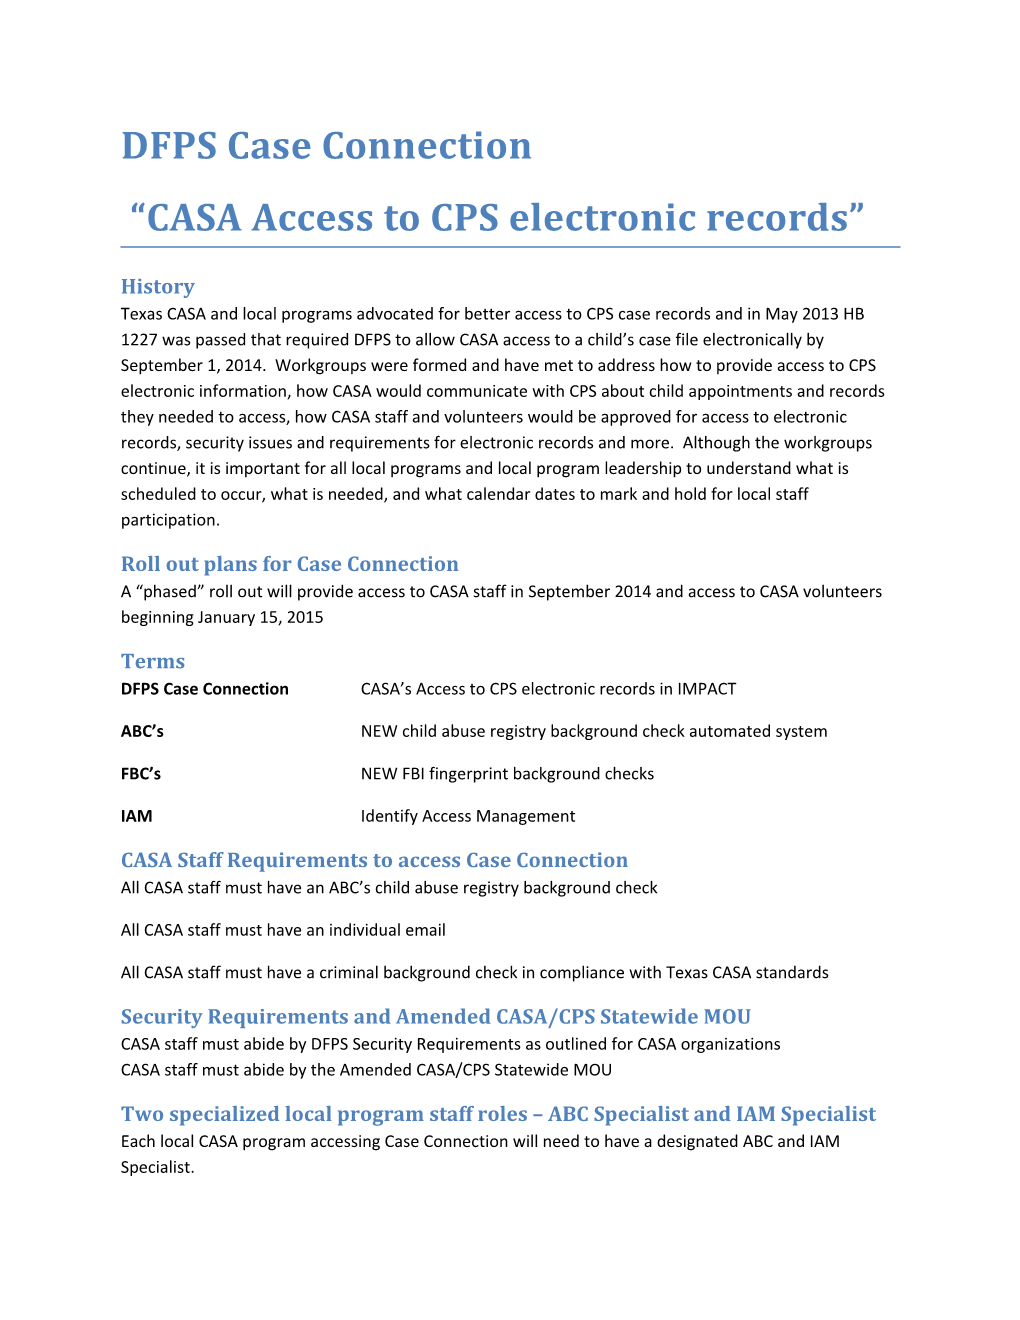 CASA Access to CPS Electronic Records